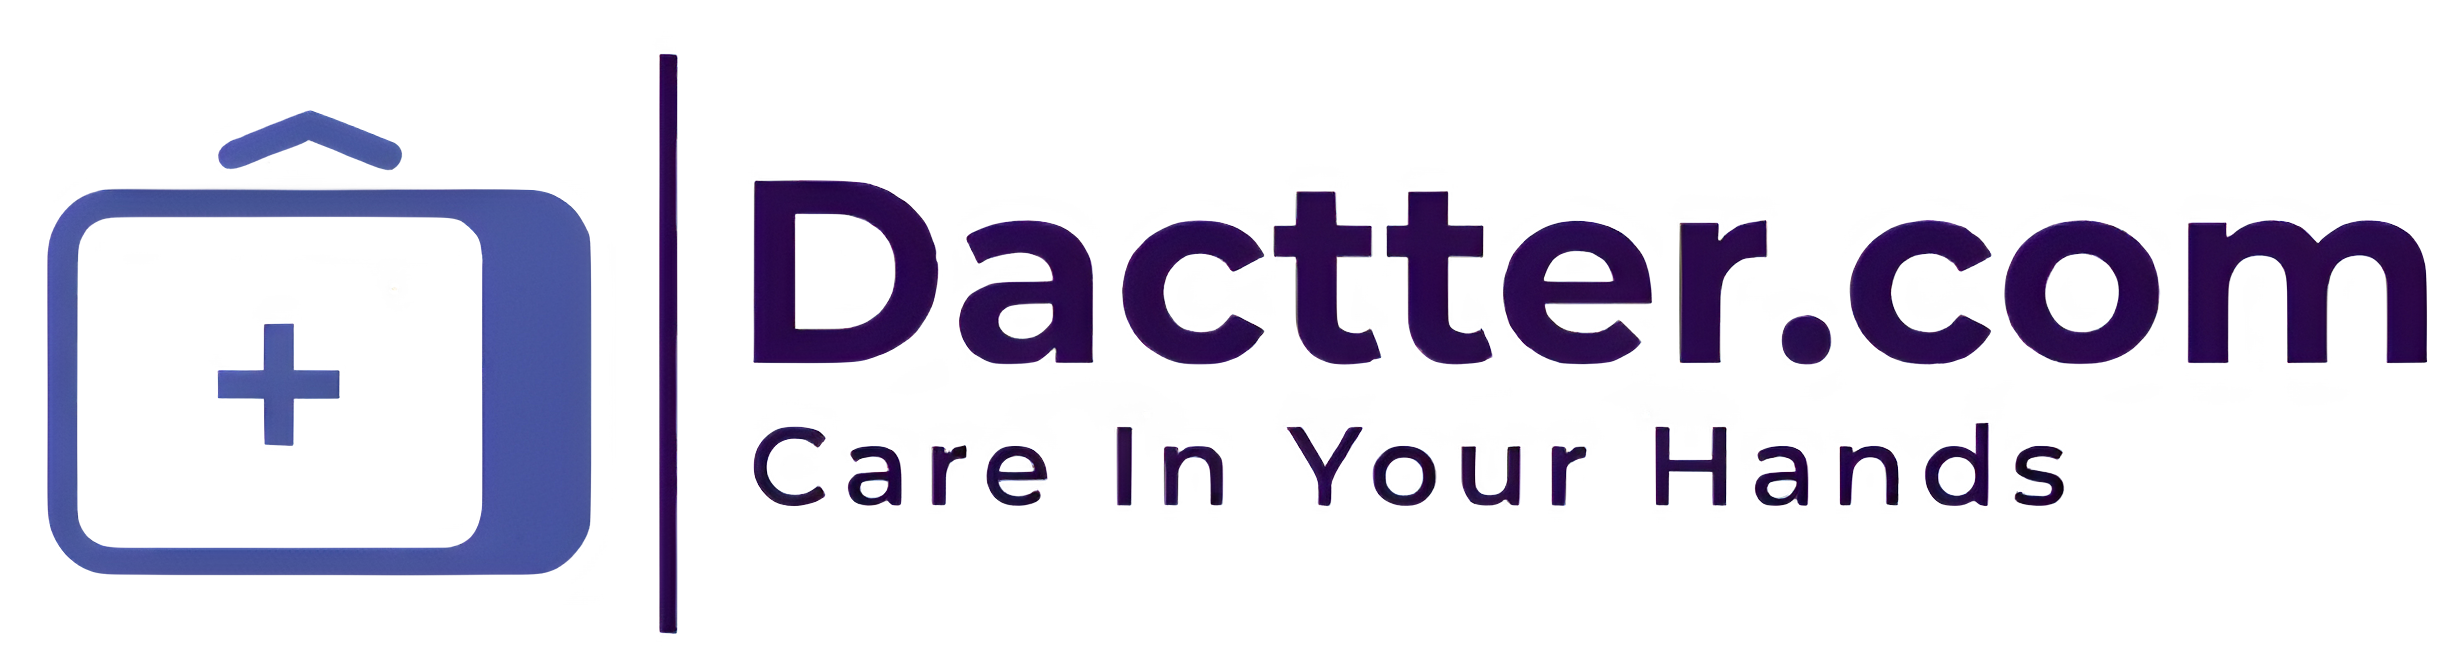 Home Page - Dactter.com